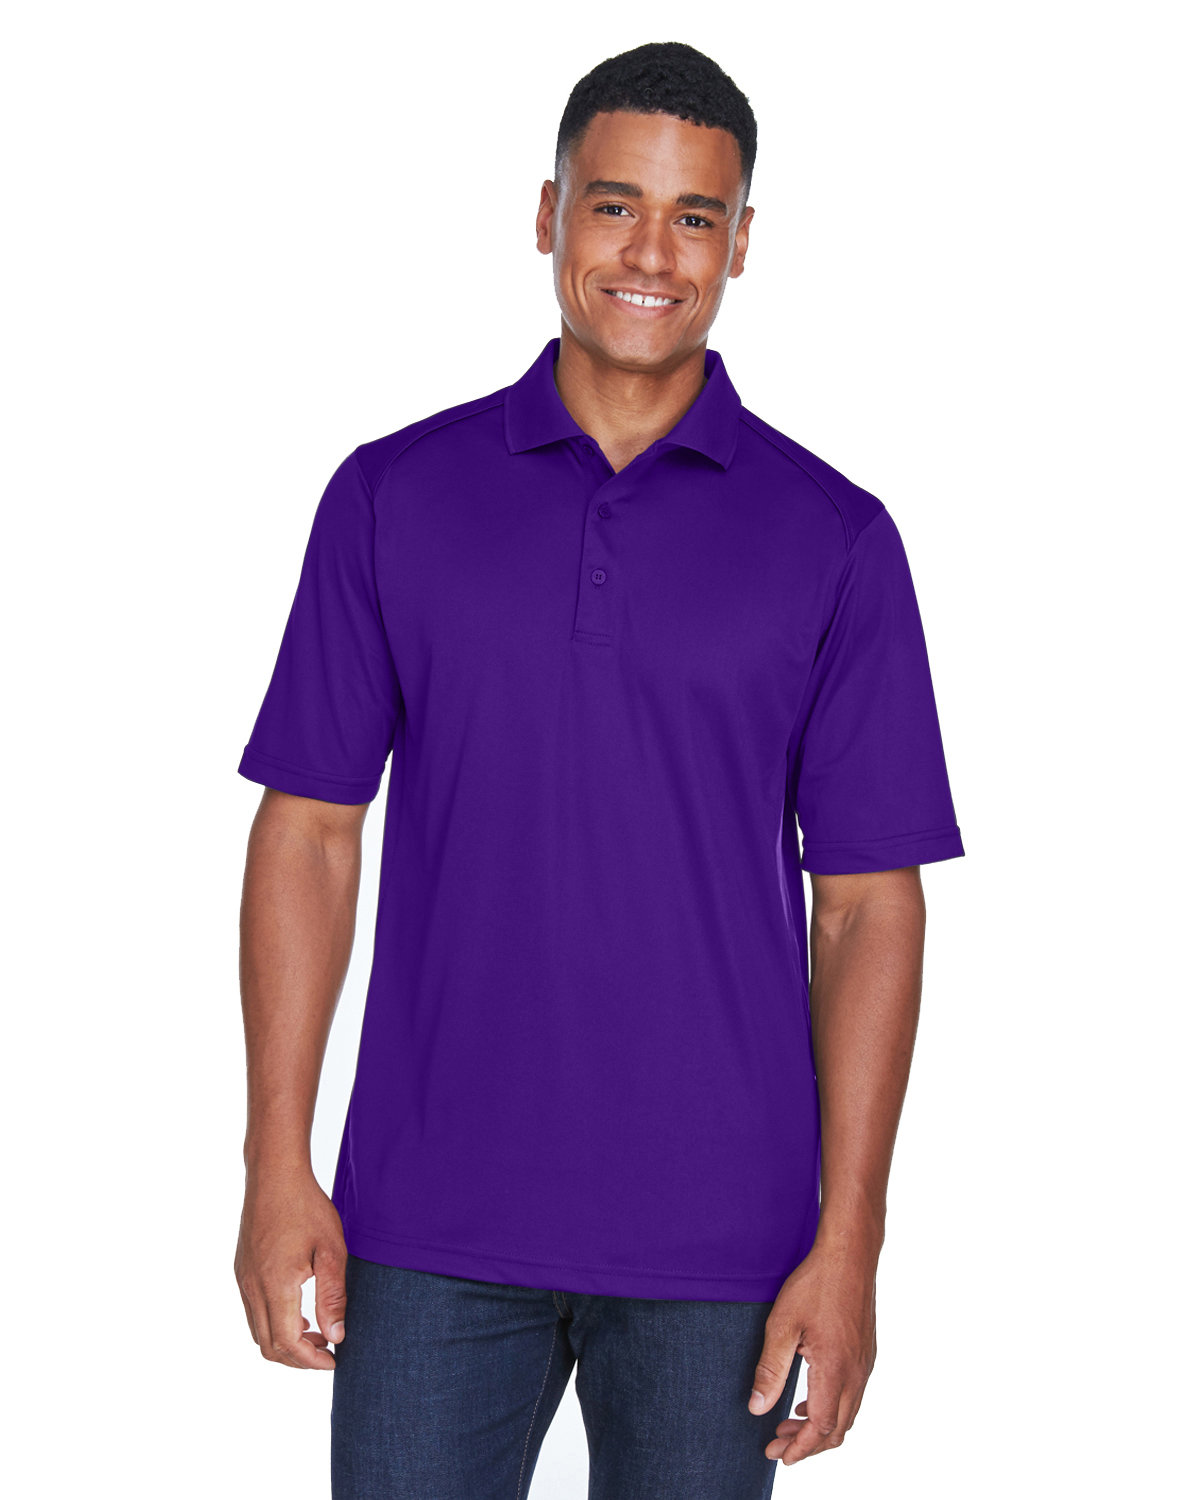 Extreme Men's Eperformance™ Shield Snag Protection Short-Sleeve Polo CAMPUS PURPLE 